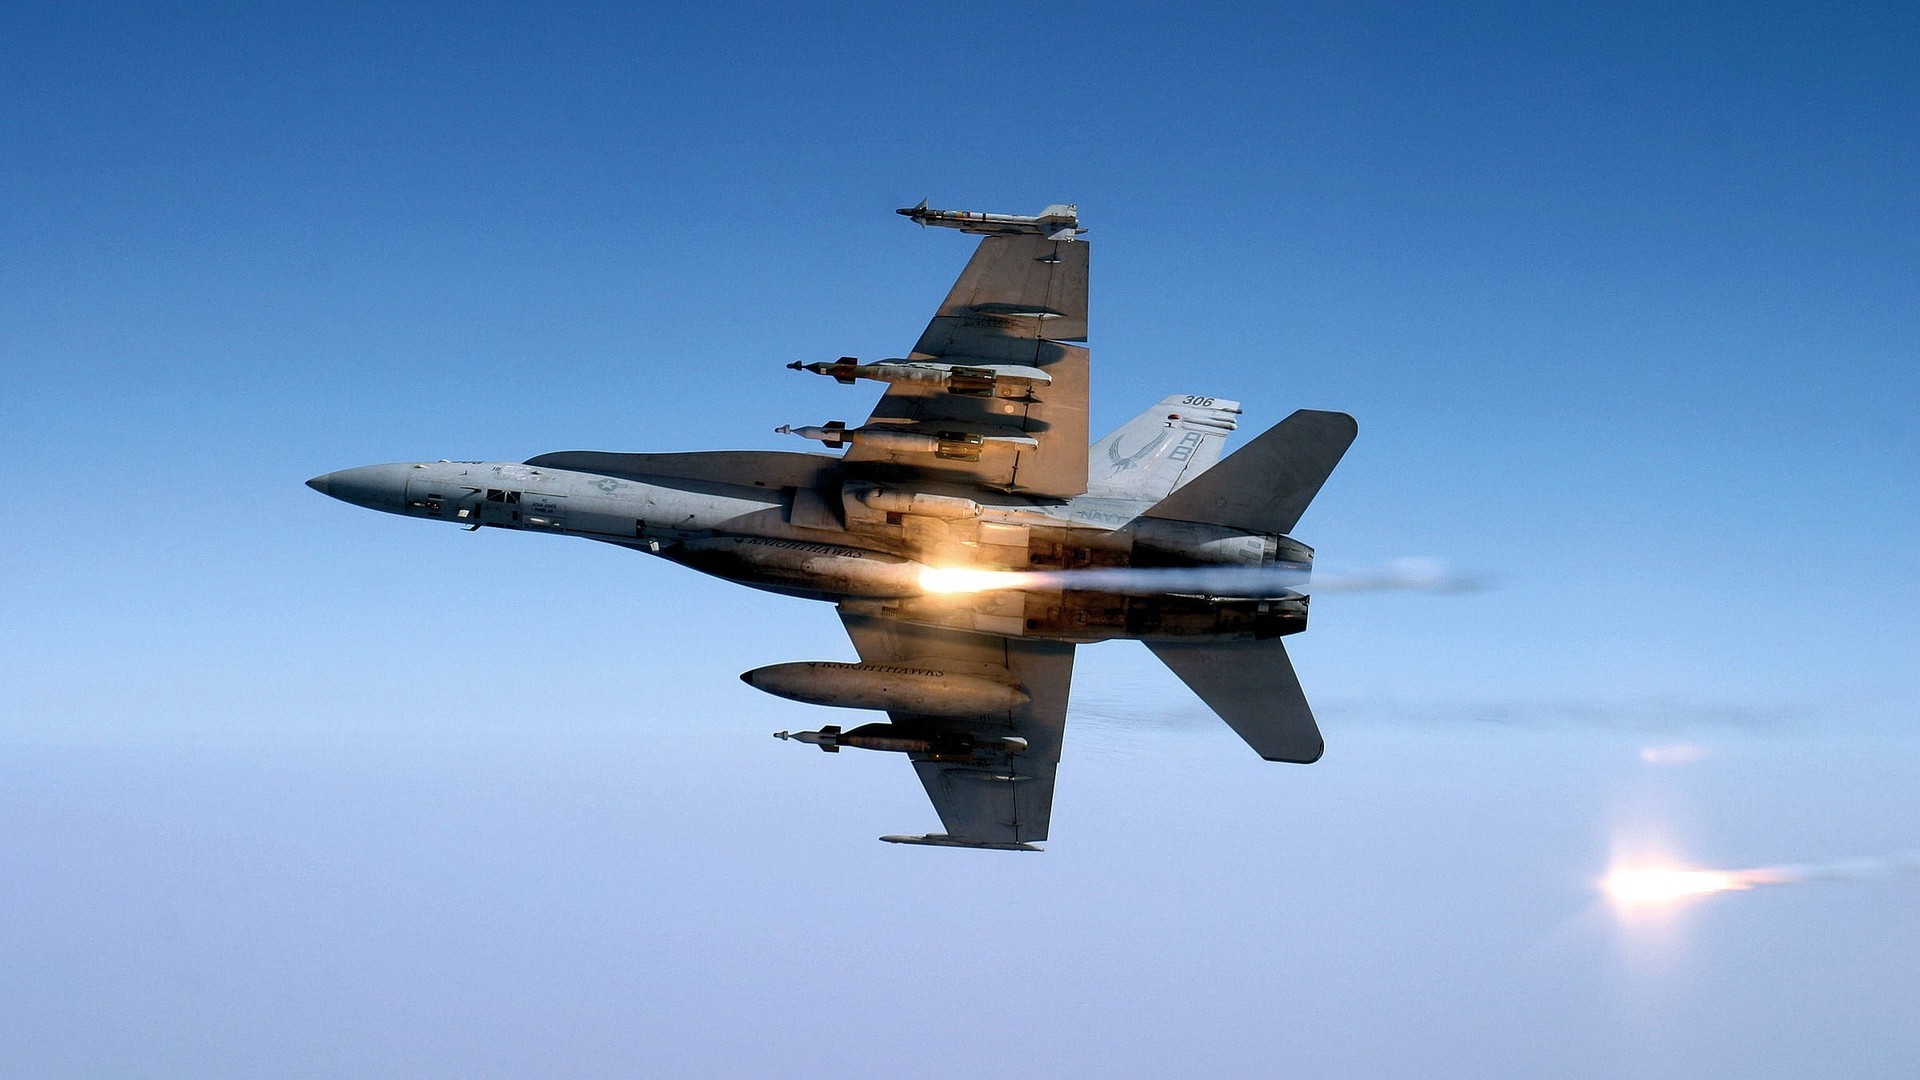 General 1920x1080 aircraft military aircraft missiles military vehicle vehicle military McDonnell Douglas F/A-18 Hornet United States Navy flares American aircraft McDonnell Douglas